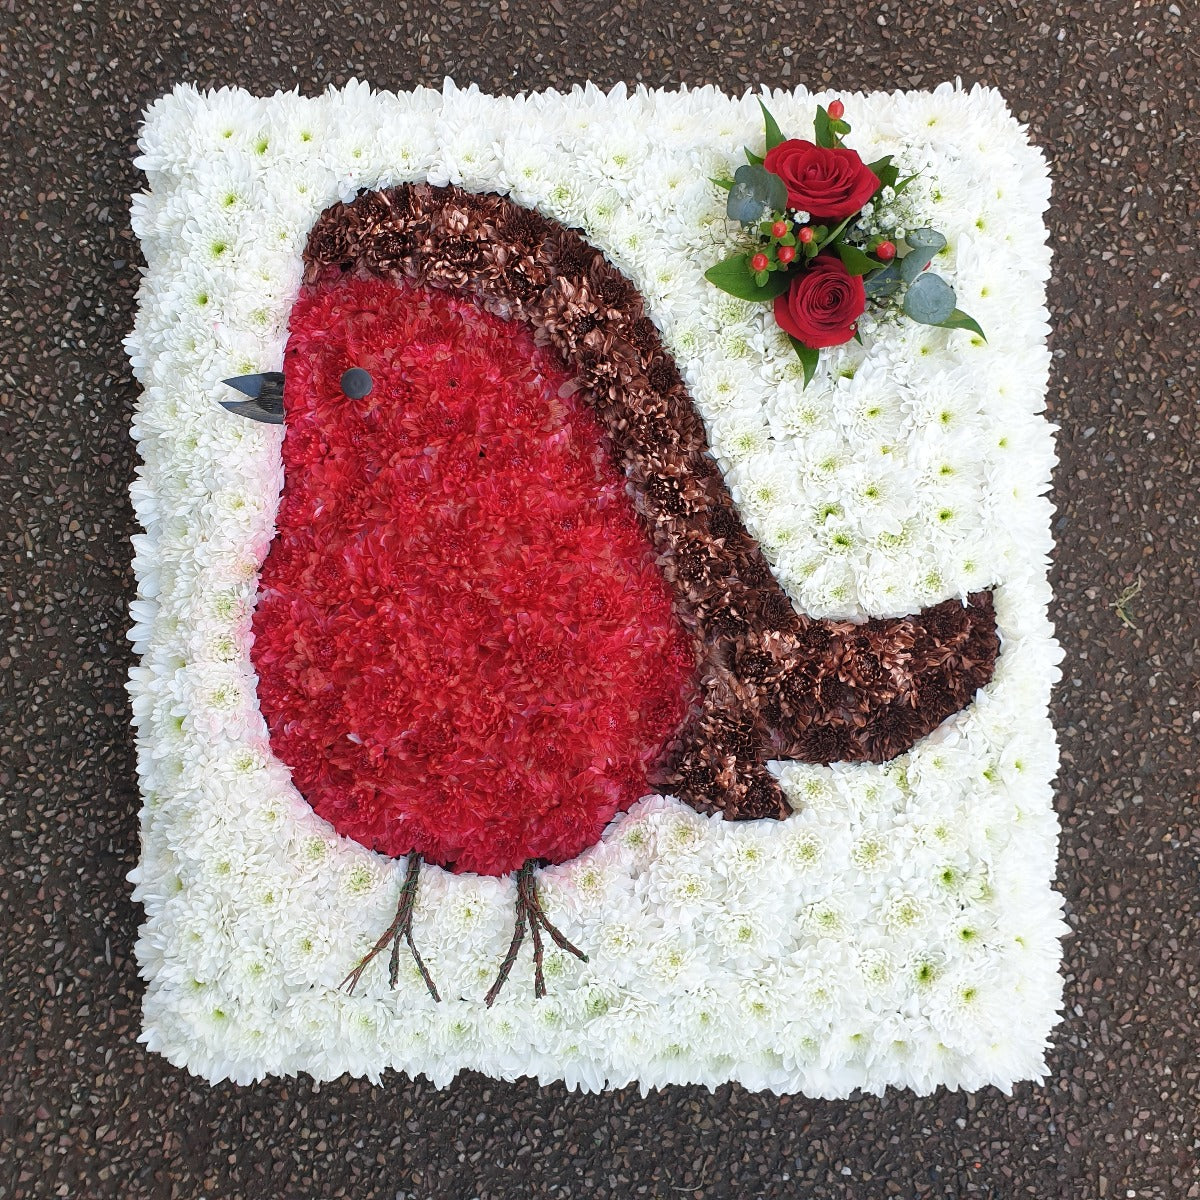 Red Robin Tribute Funeral Tribute